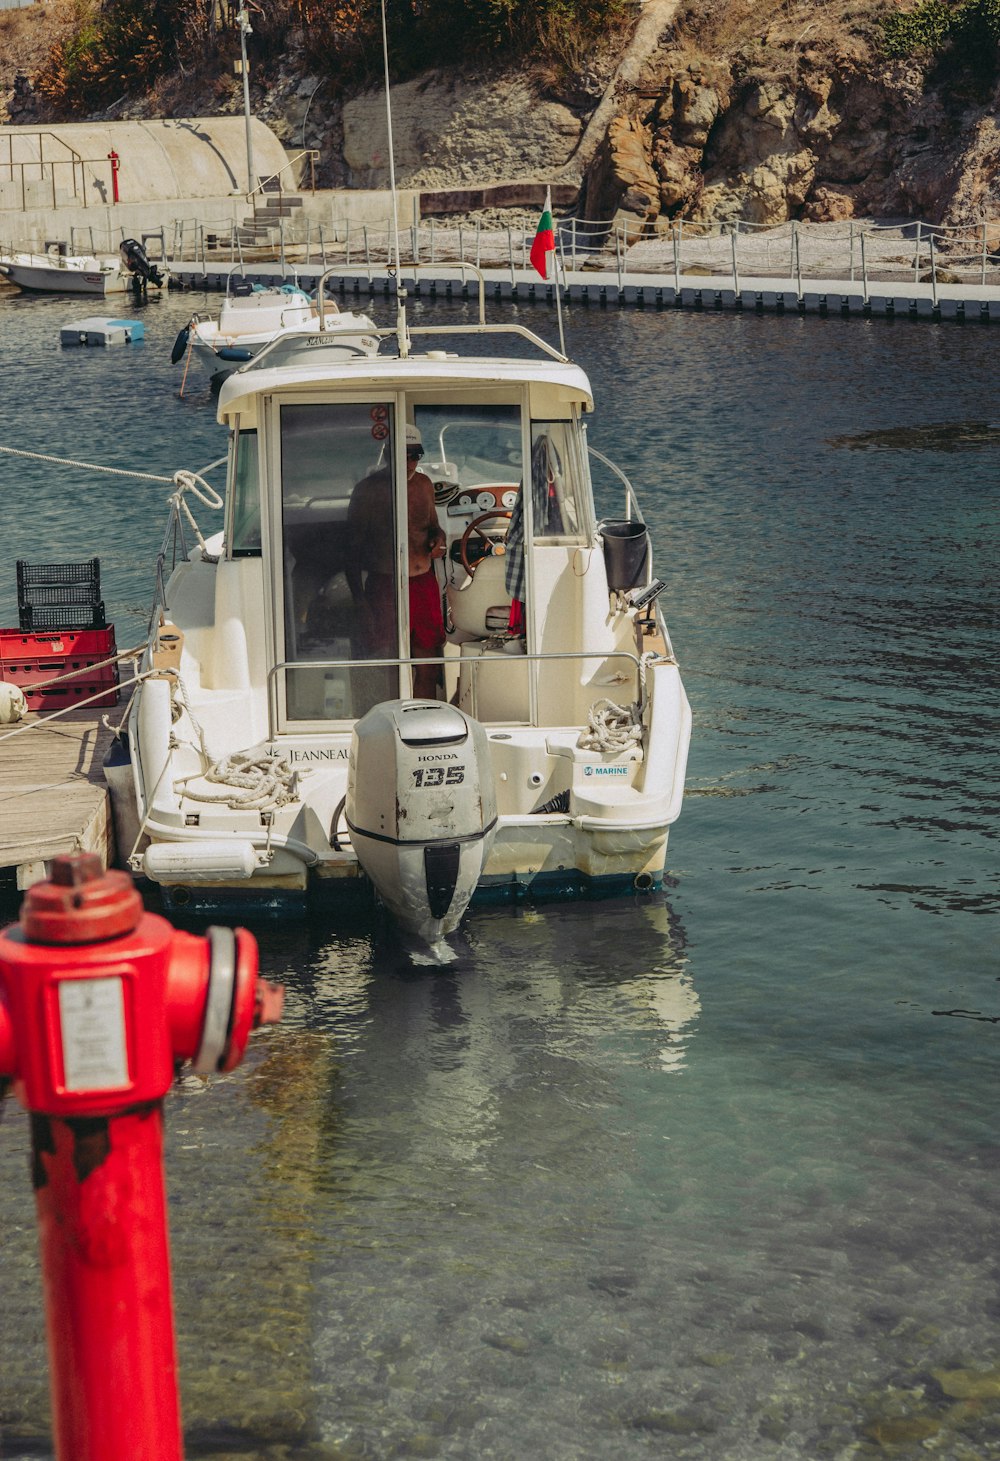 a boat is docked at a dock with a red fire hydrant